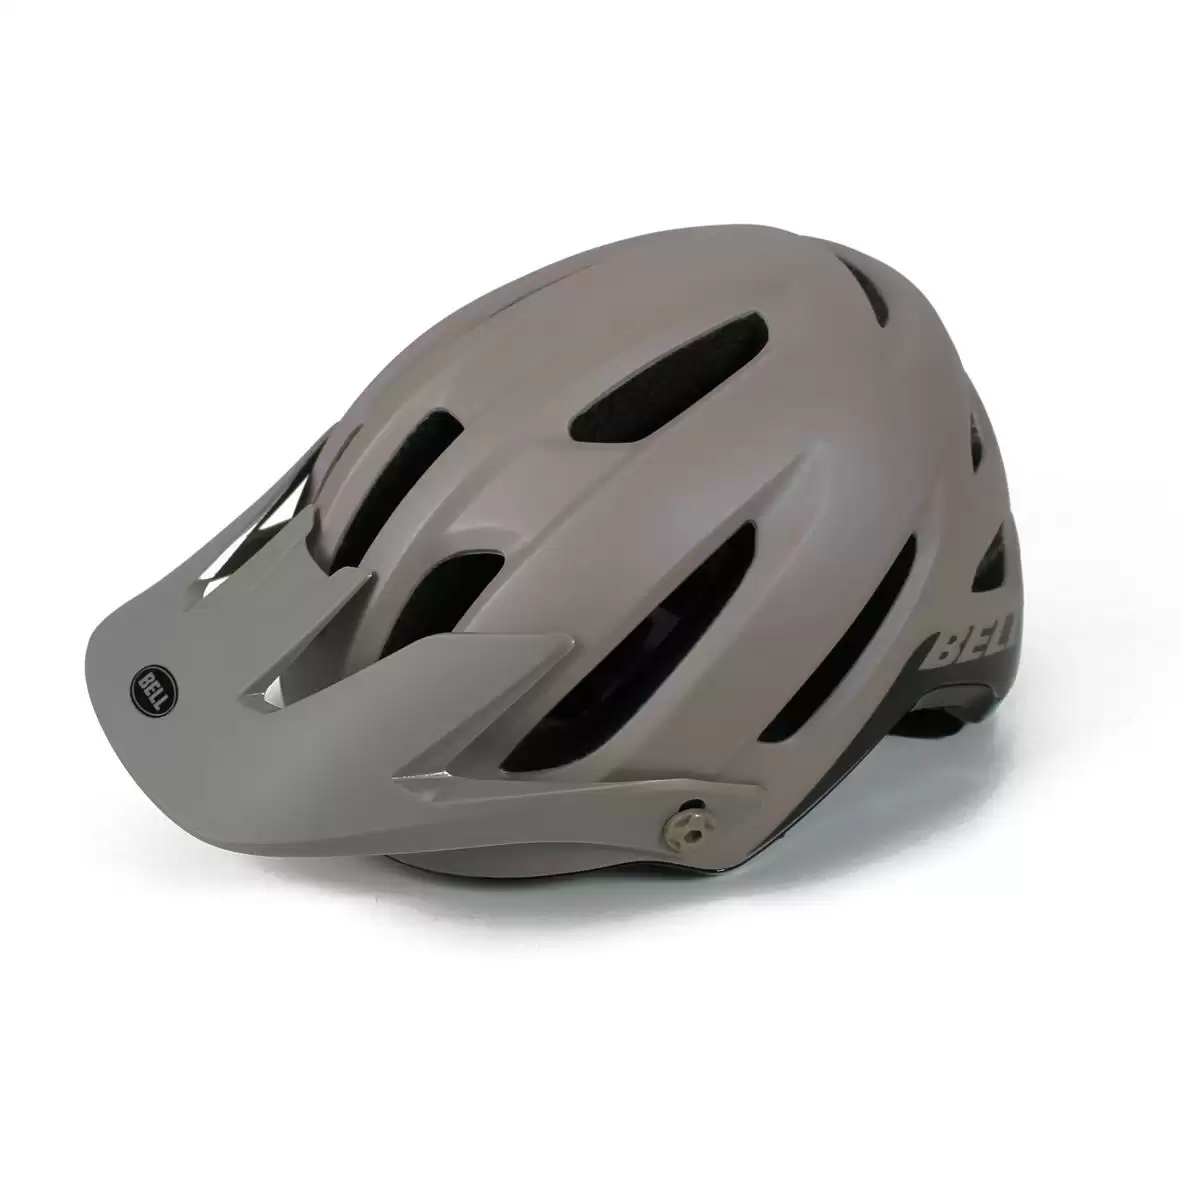 Capacete 4FORTY MIPS tamanho S (52-56cm) - image